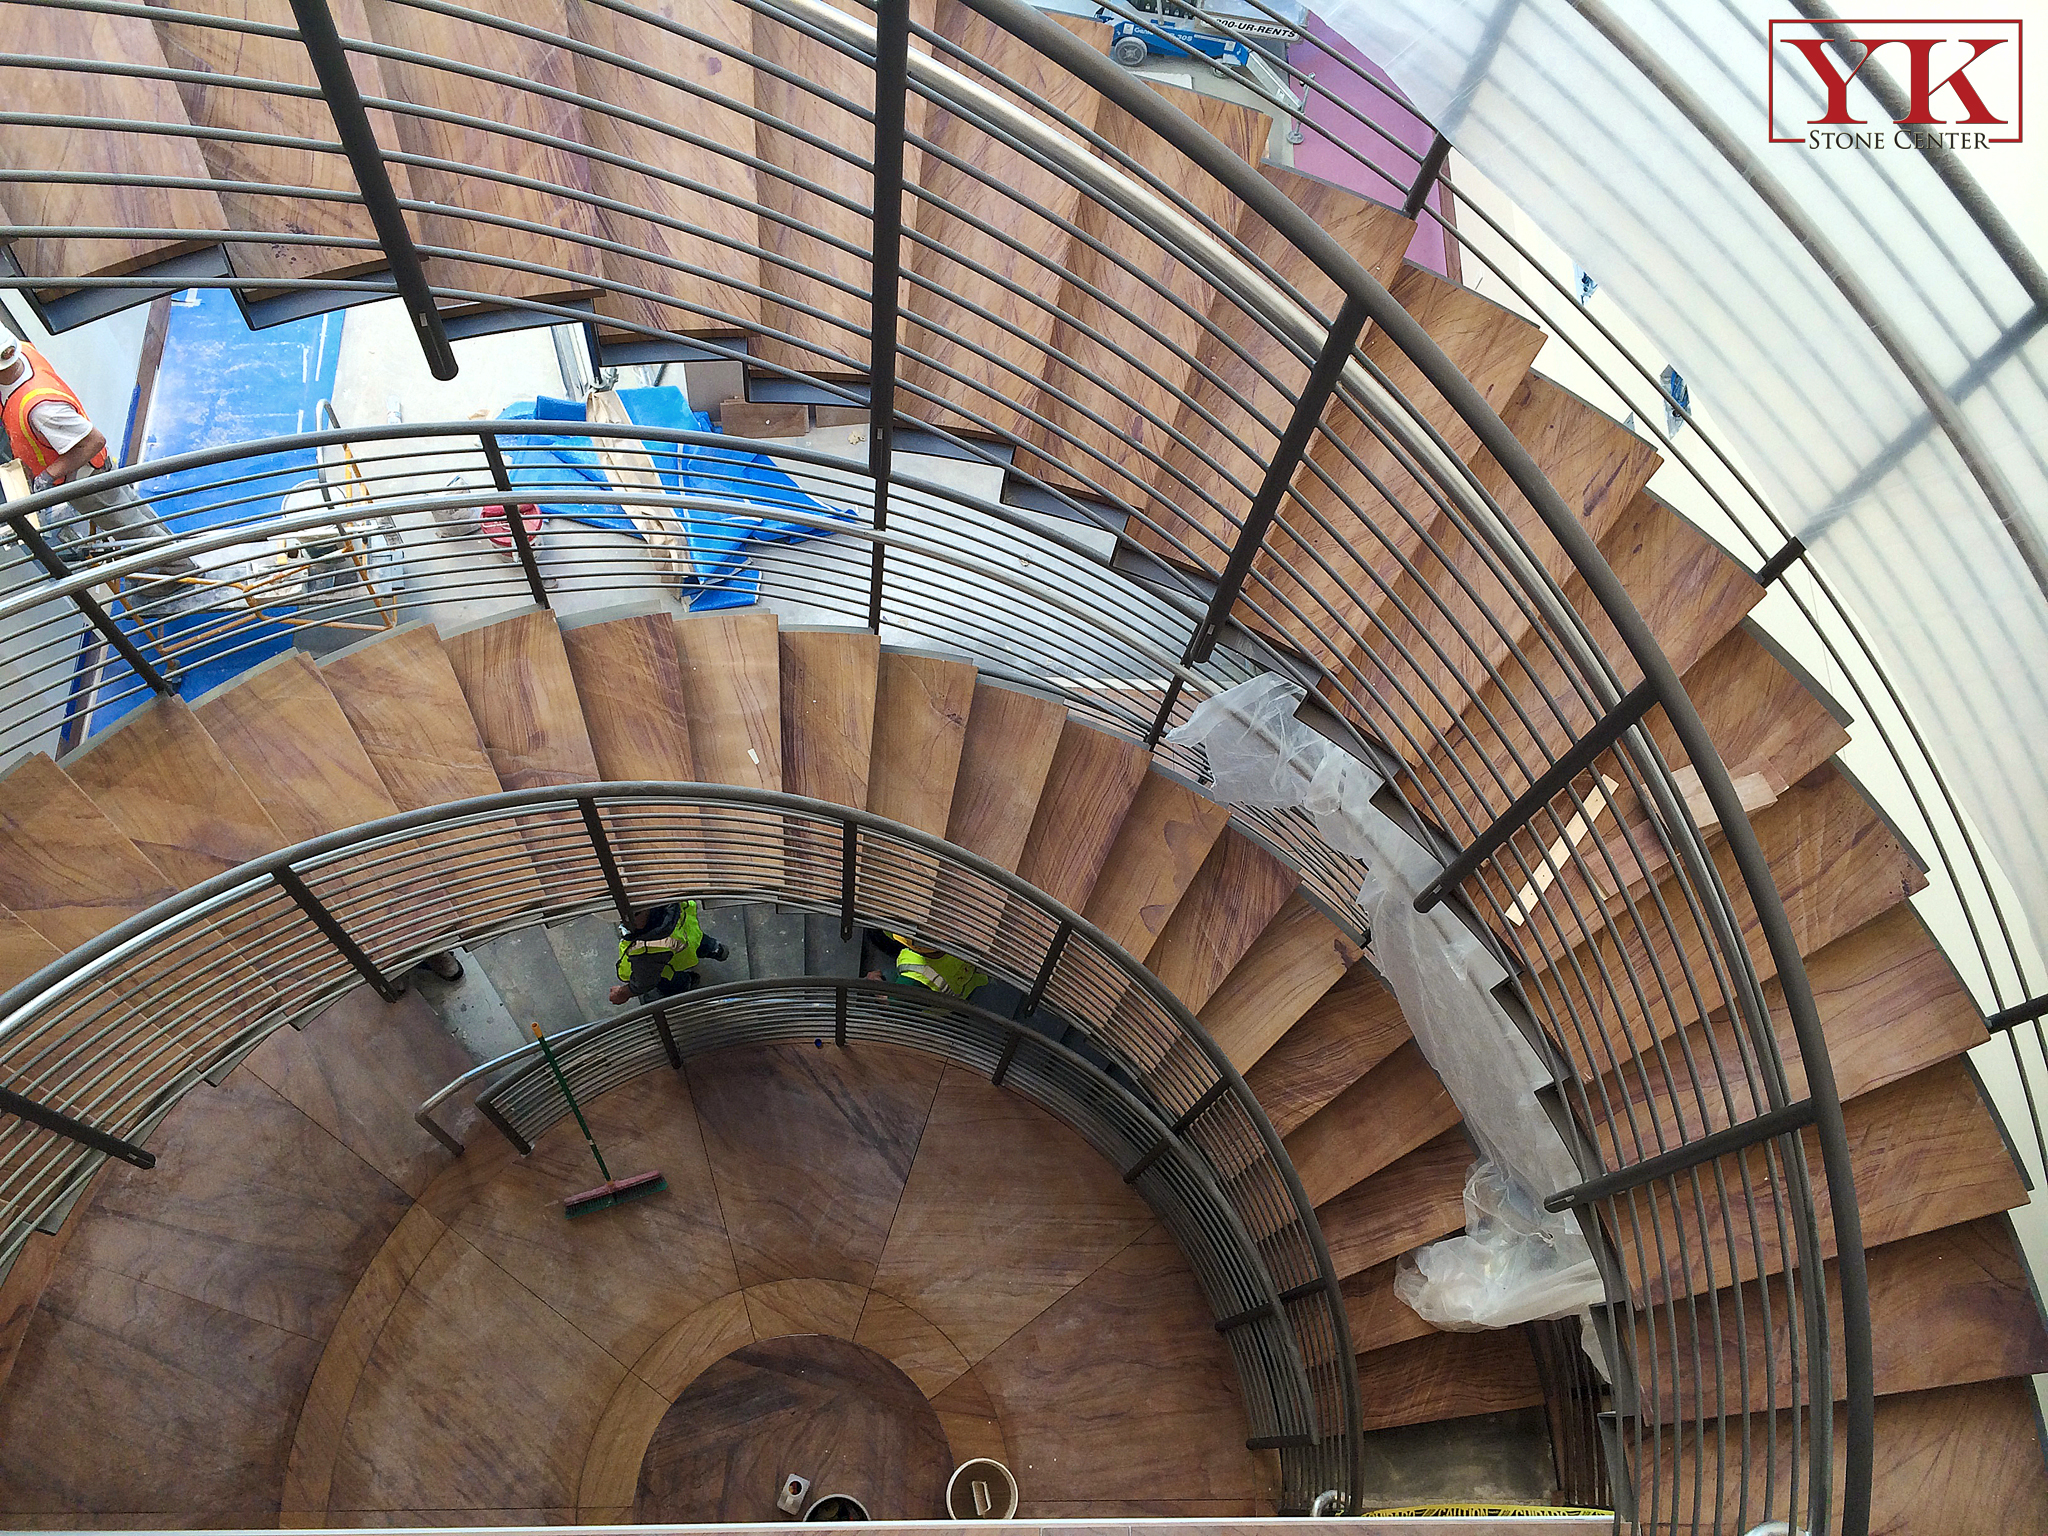 before and after antero resources completed project in denver colorado, installed raound stairs in antero resources building, union one station in denver colorado, yk stone center